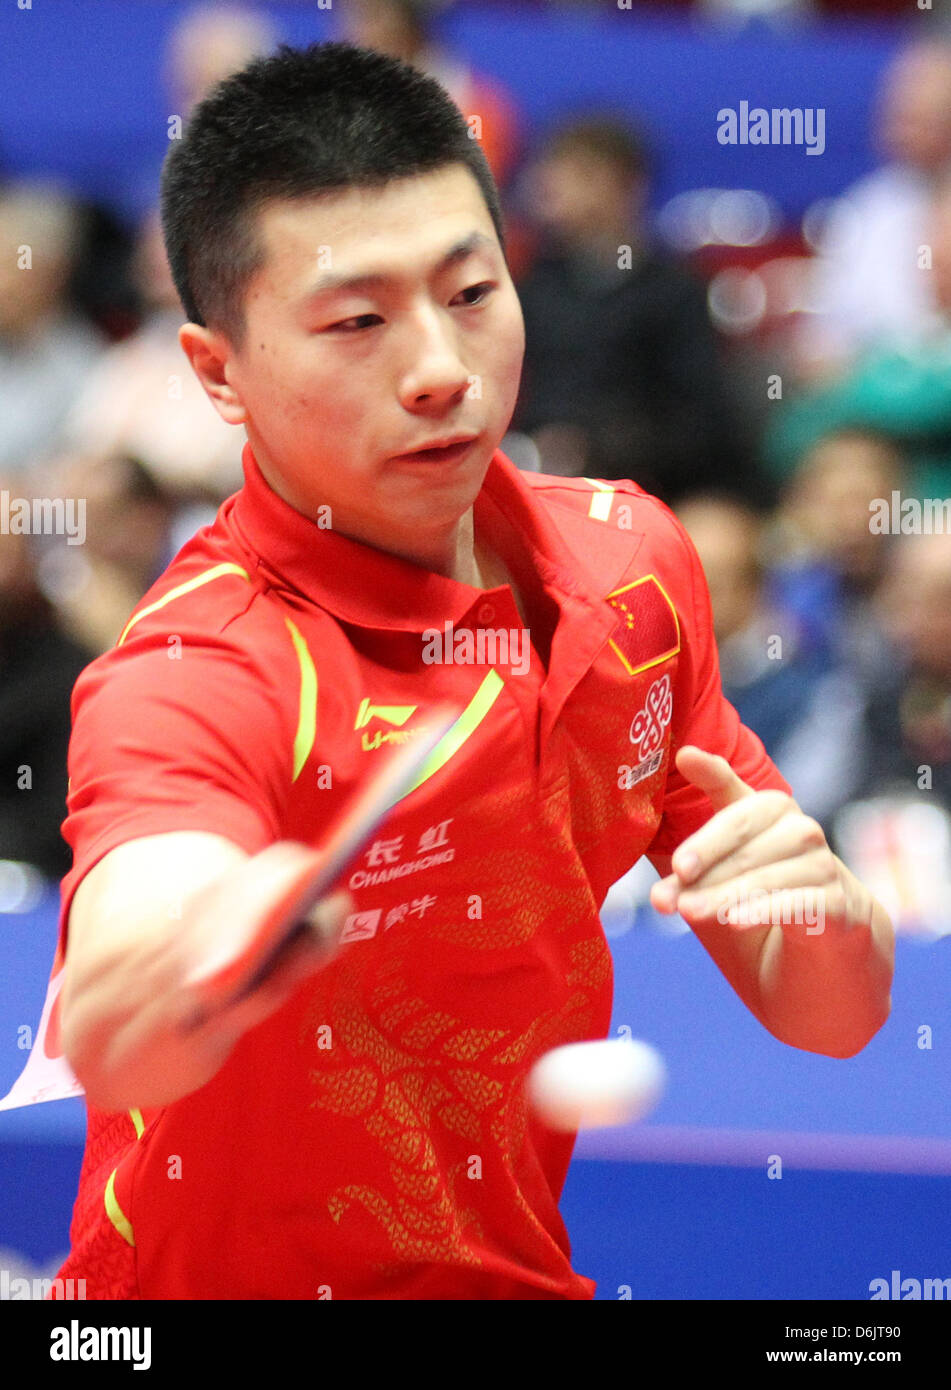 Chinese Long Ma serves against Greek Gionis during the man's World Table Tennis Championships group A match between China and Greece at the Westfalenhalle in Dortmund, Germany, 25 March 2012. Photo: FRISO GENTSCH Stock Photo